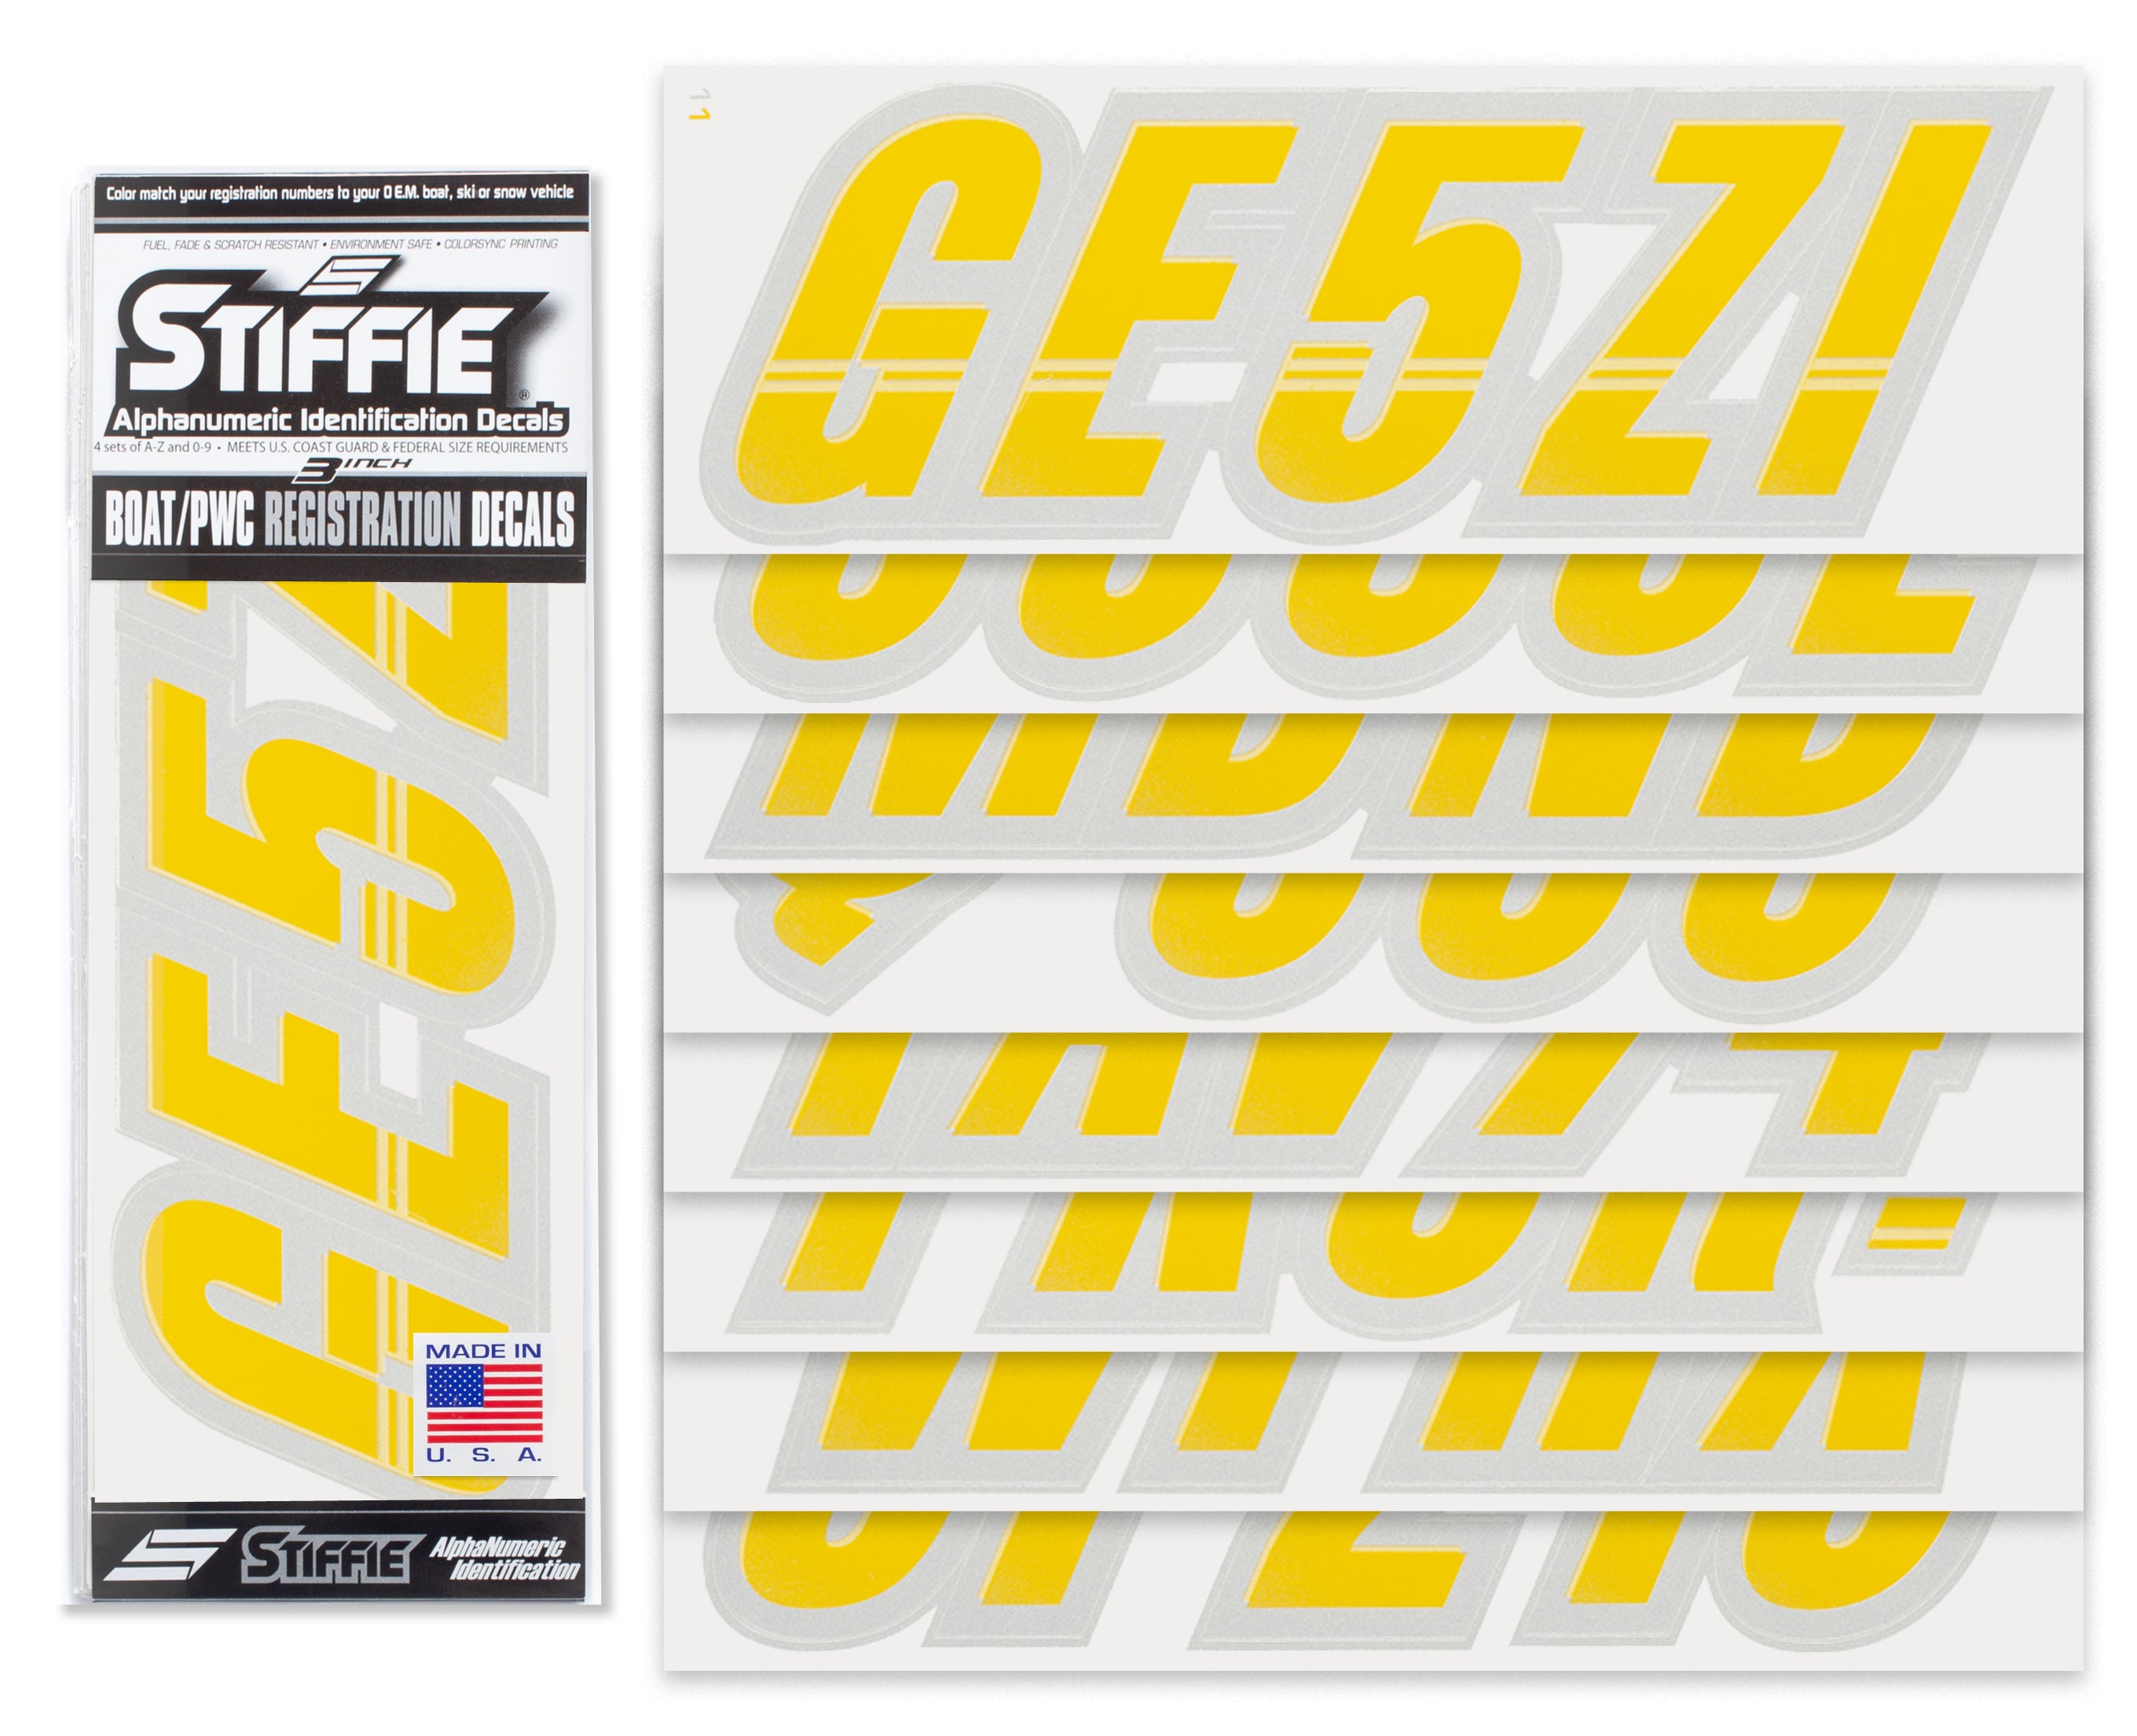 Stiffie Techtron Yellow/Silver 3" Alpha-Numeric Registration Identification Numbers Stickers Decals for Boats & Personal Watercraft